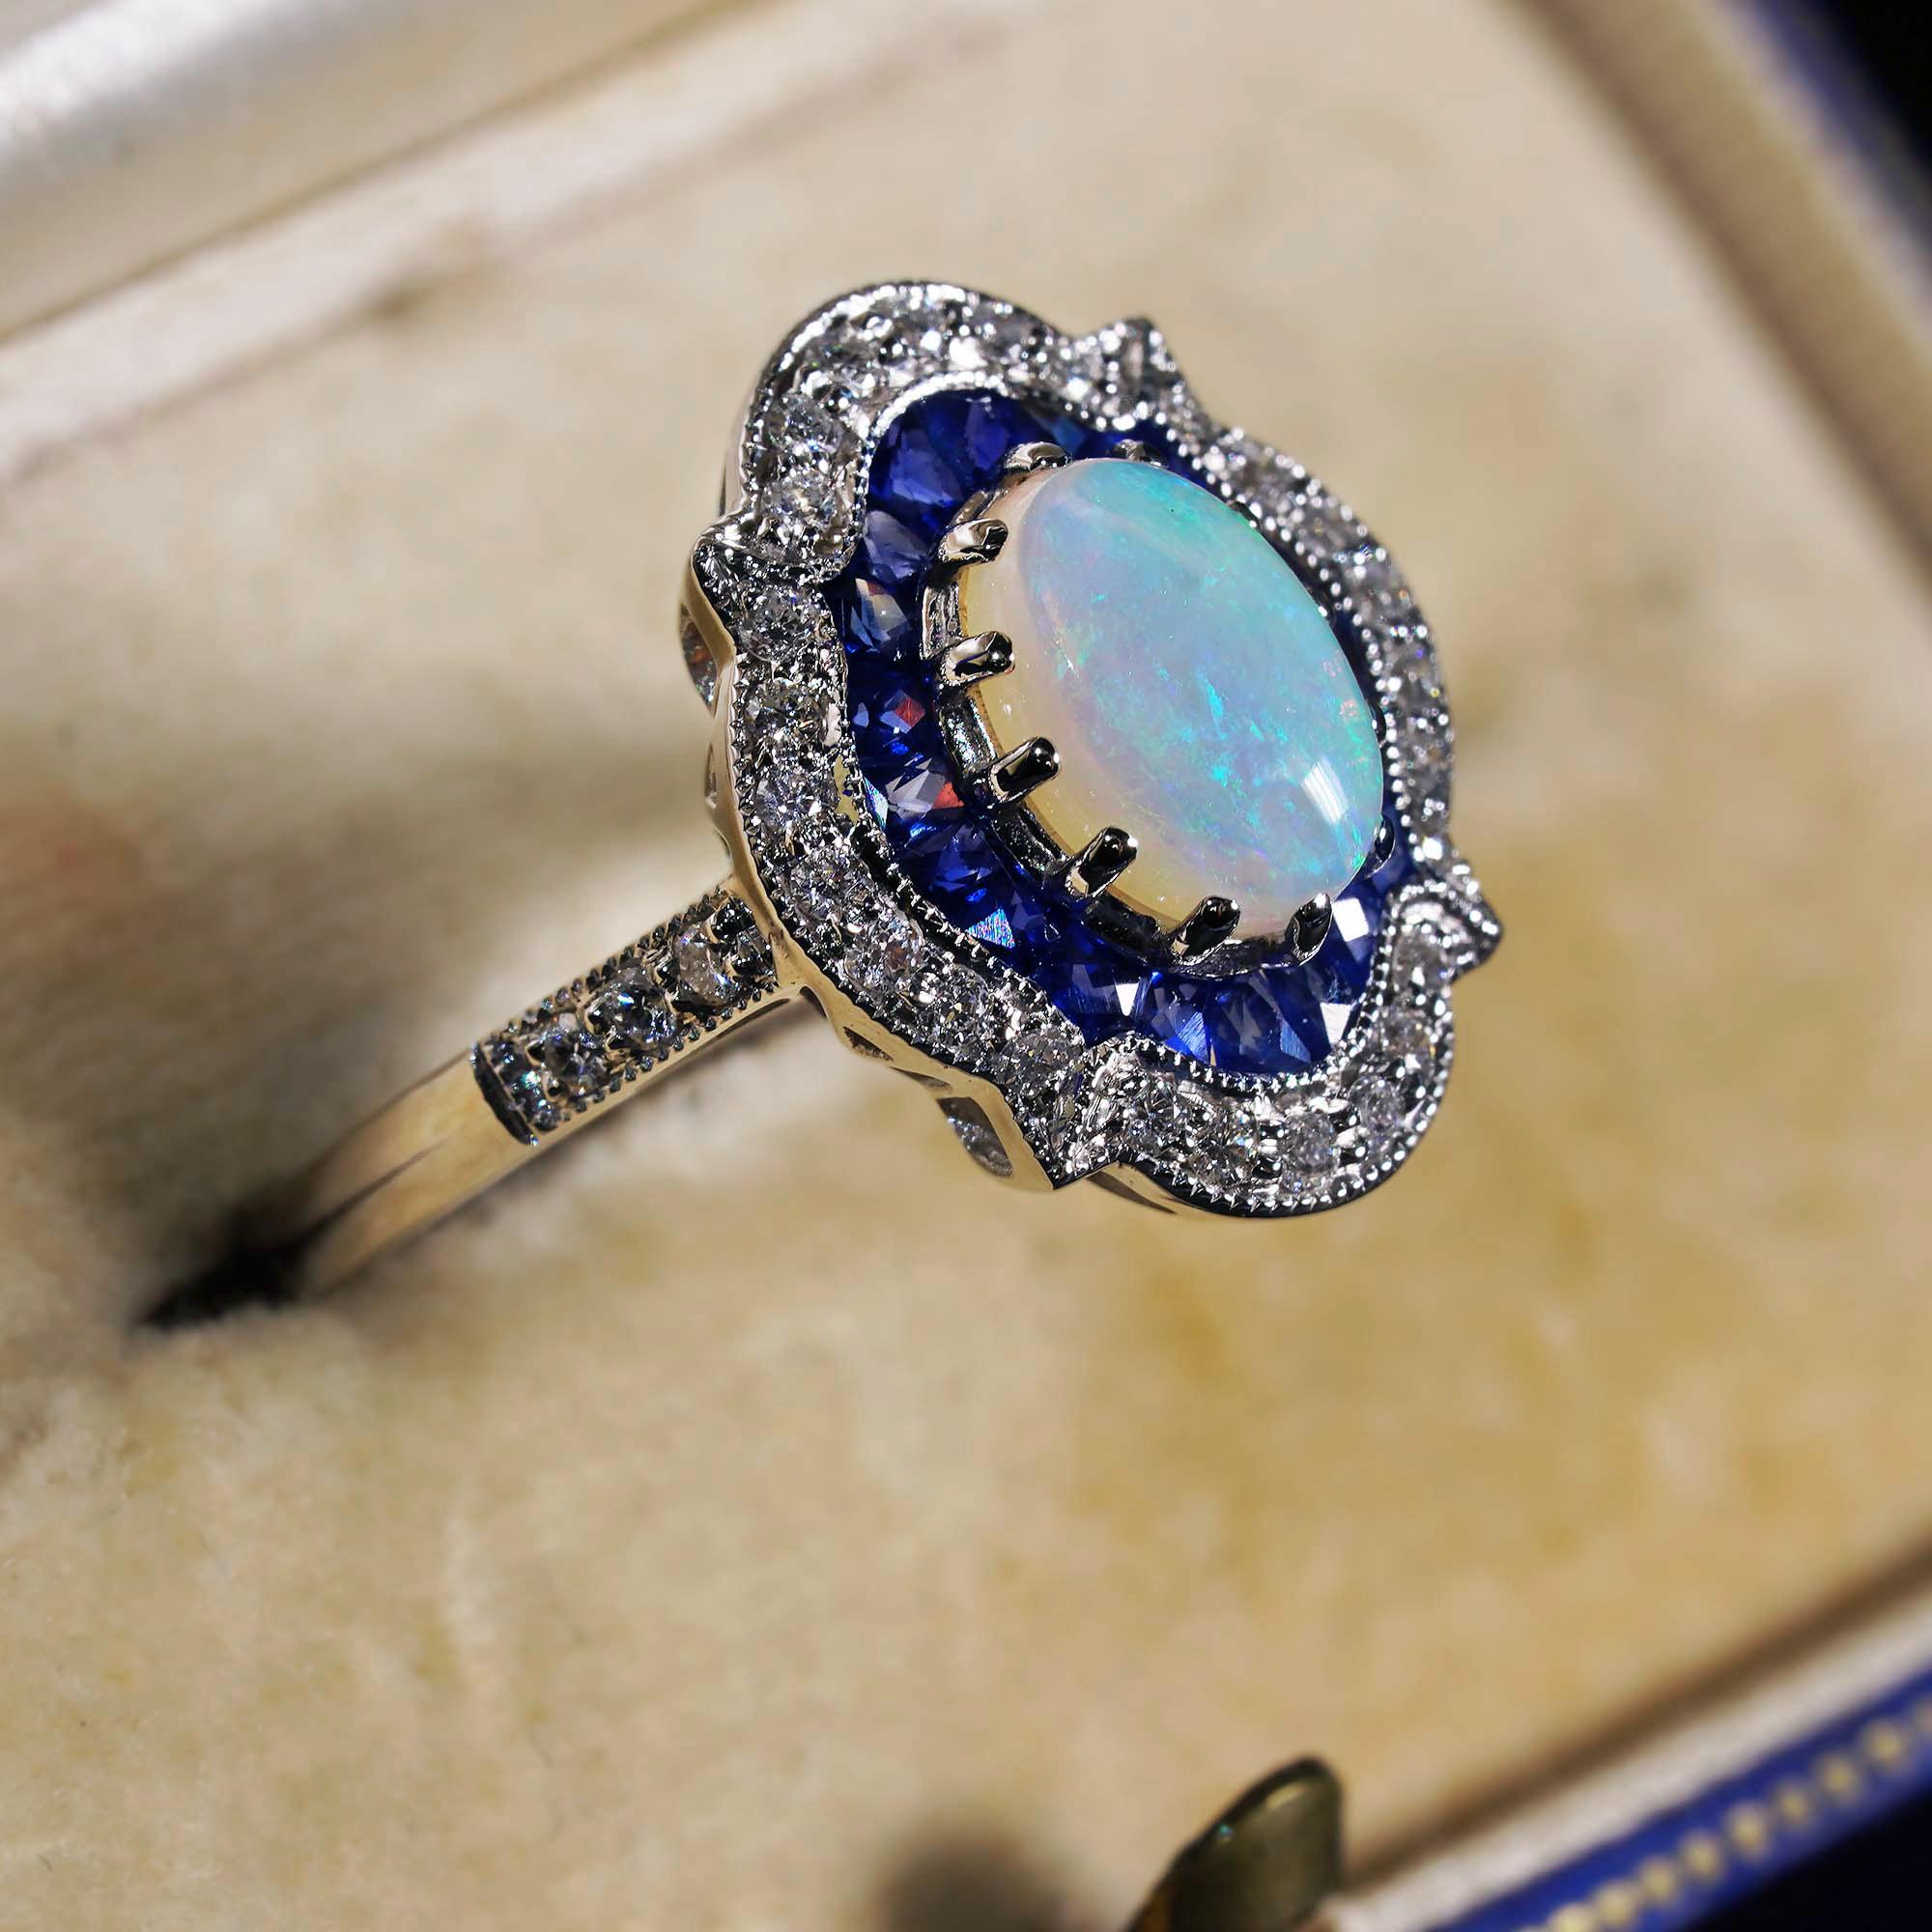 A totally unique opal, sapphire and diamond cluster ring of exceptional design. The center prong set with a magical natural opal displaying rainbow like hues. The opal is surrounded by a halo of French cut blue sapphires and sparkly diamonds in a